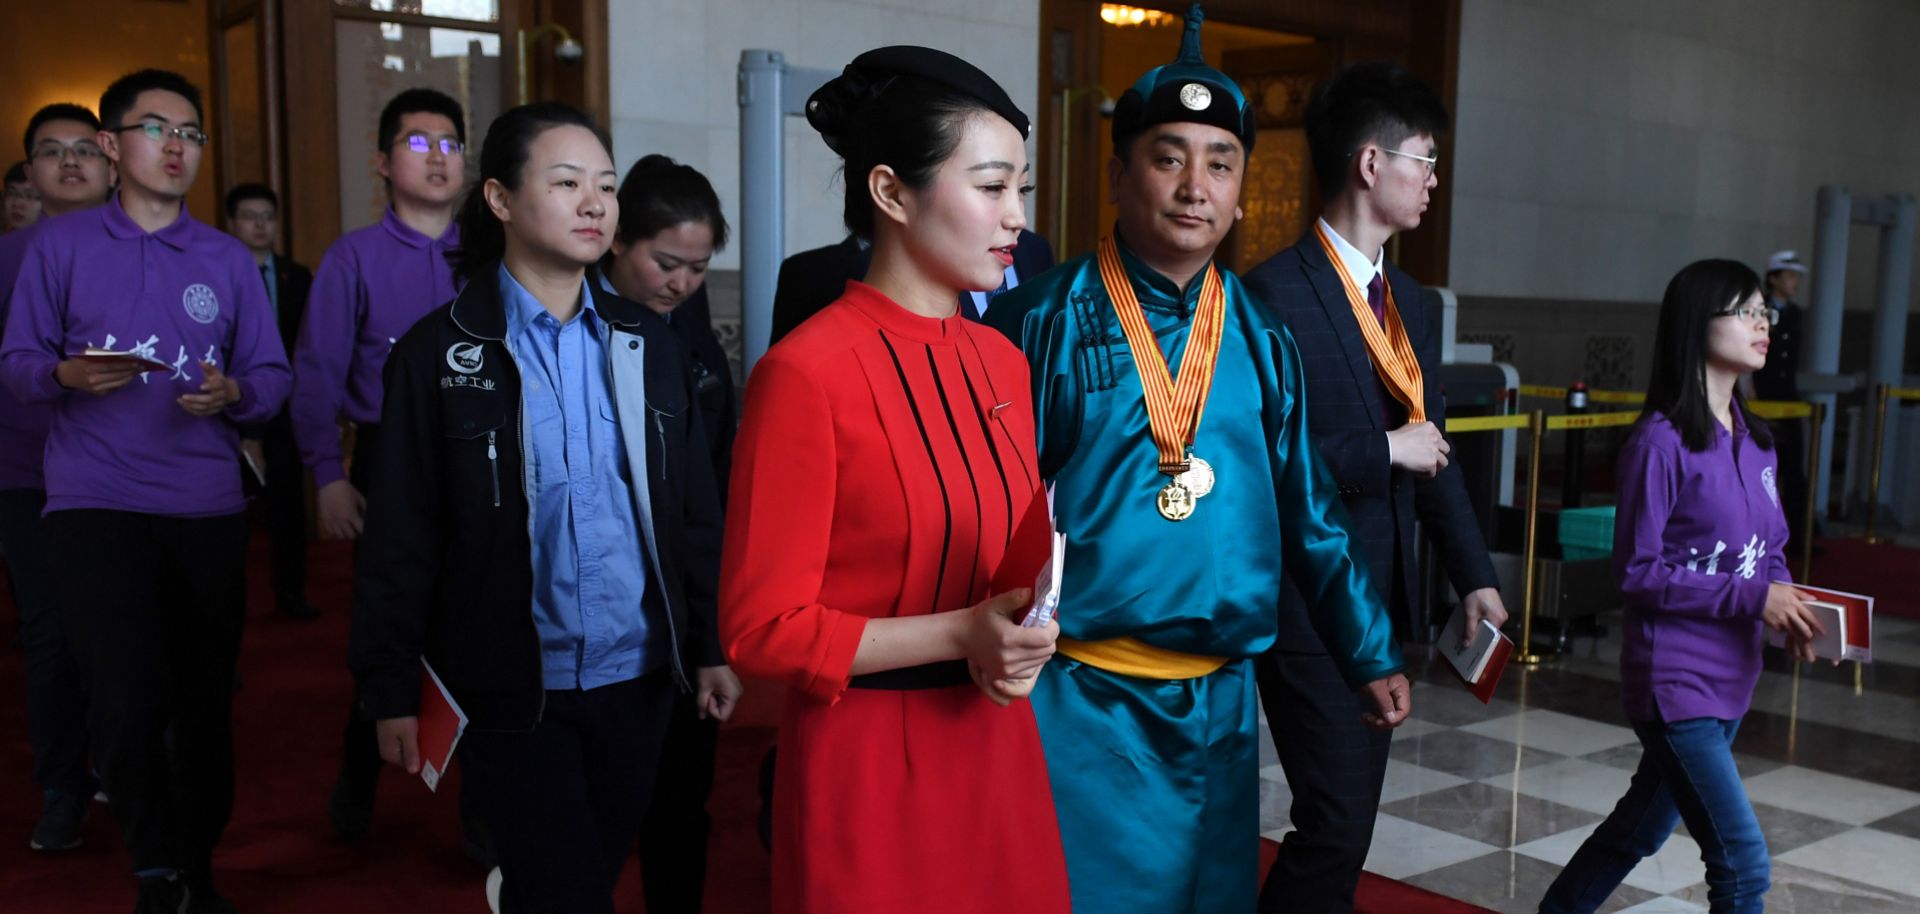 Guests leave a ceremony marking the 100th anniversary of China's May Fourth Movement against Western imperialism on April 30, 2019, in Beijing's Great Hall of the People.